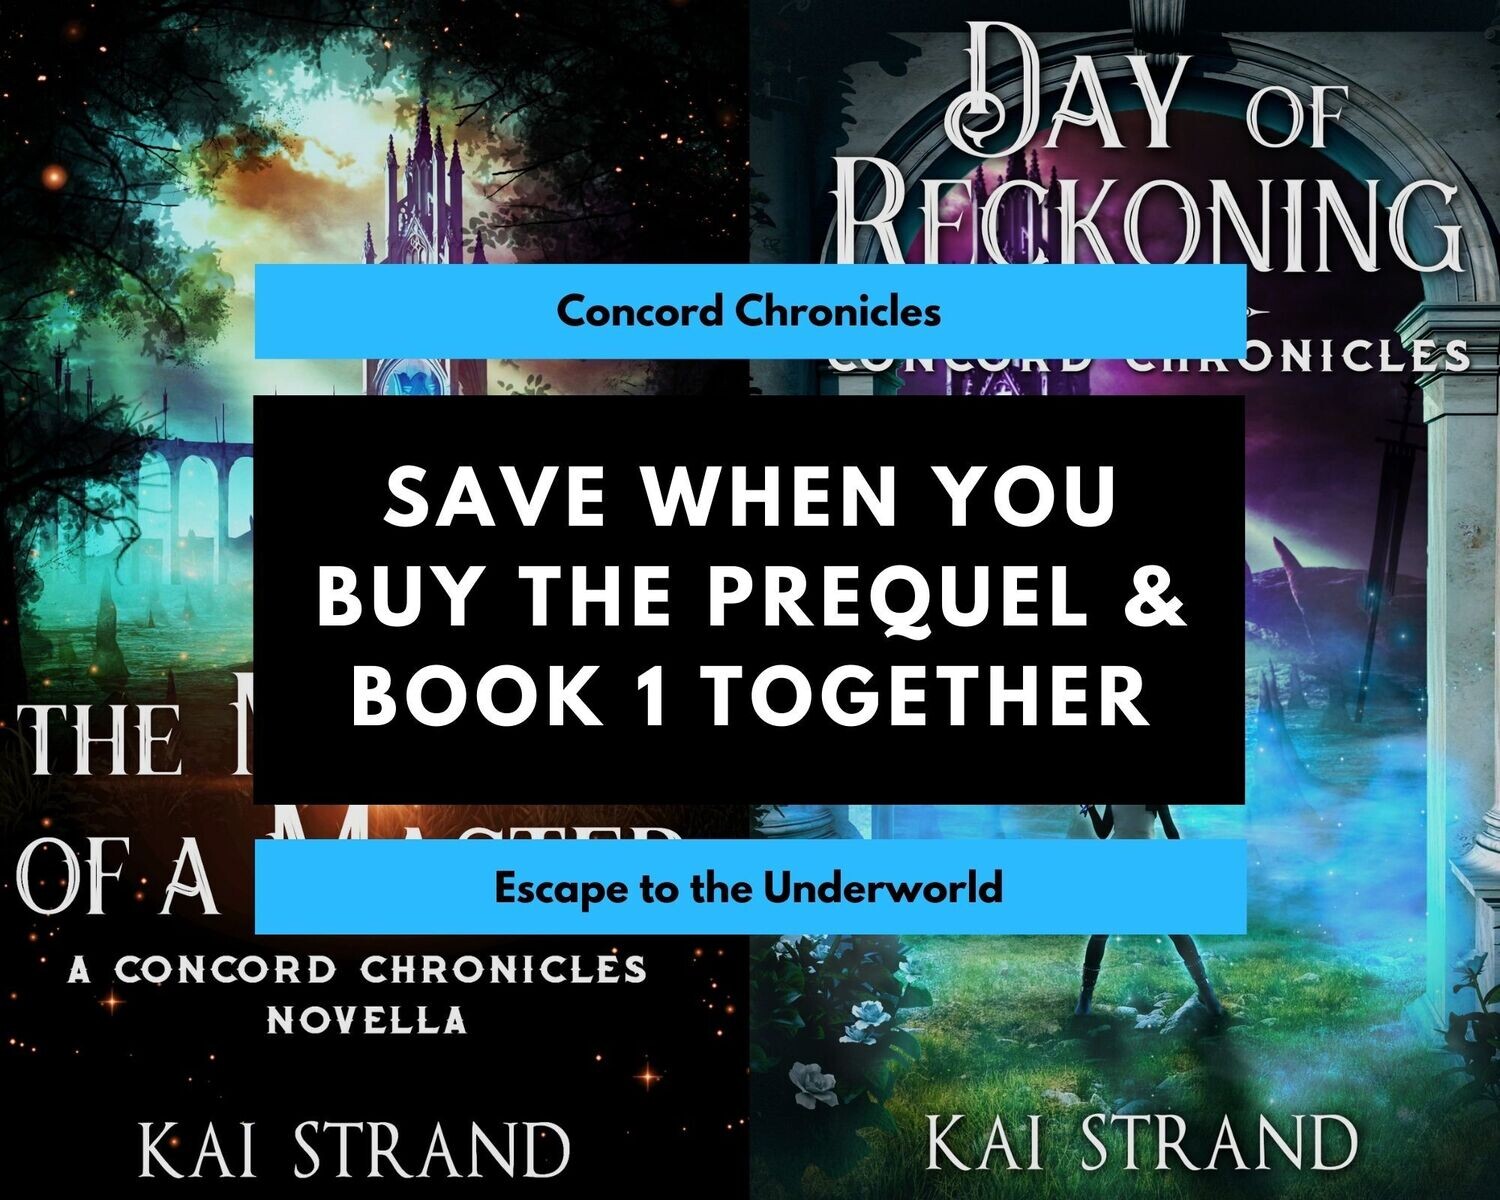 Concord Chronicles series